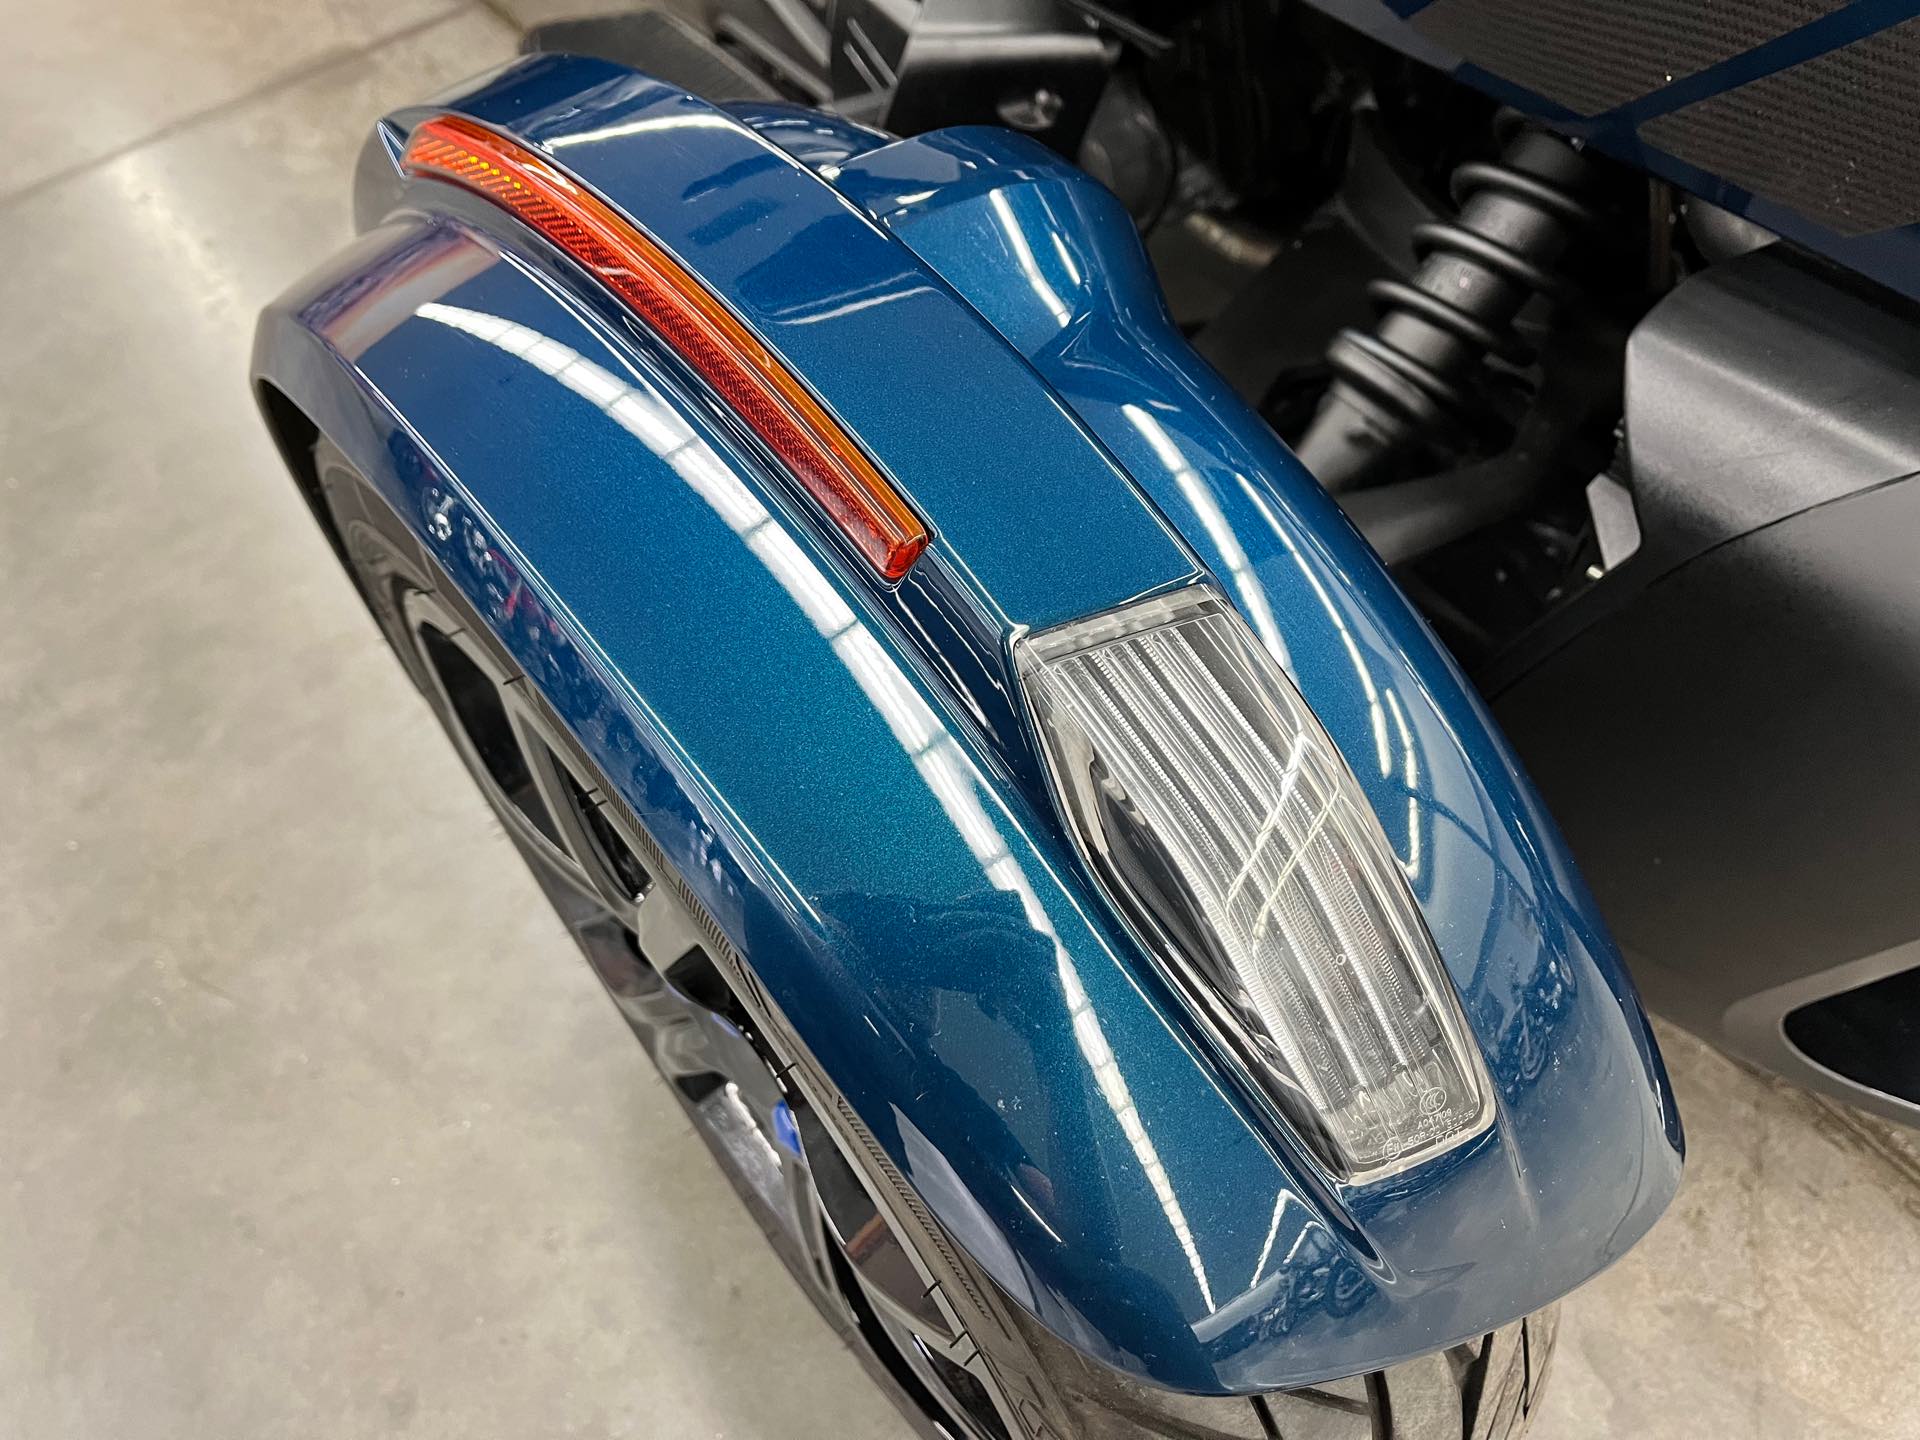 2020 Can-Am Spyder RT Base at Aces Motorcycles - Denver